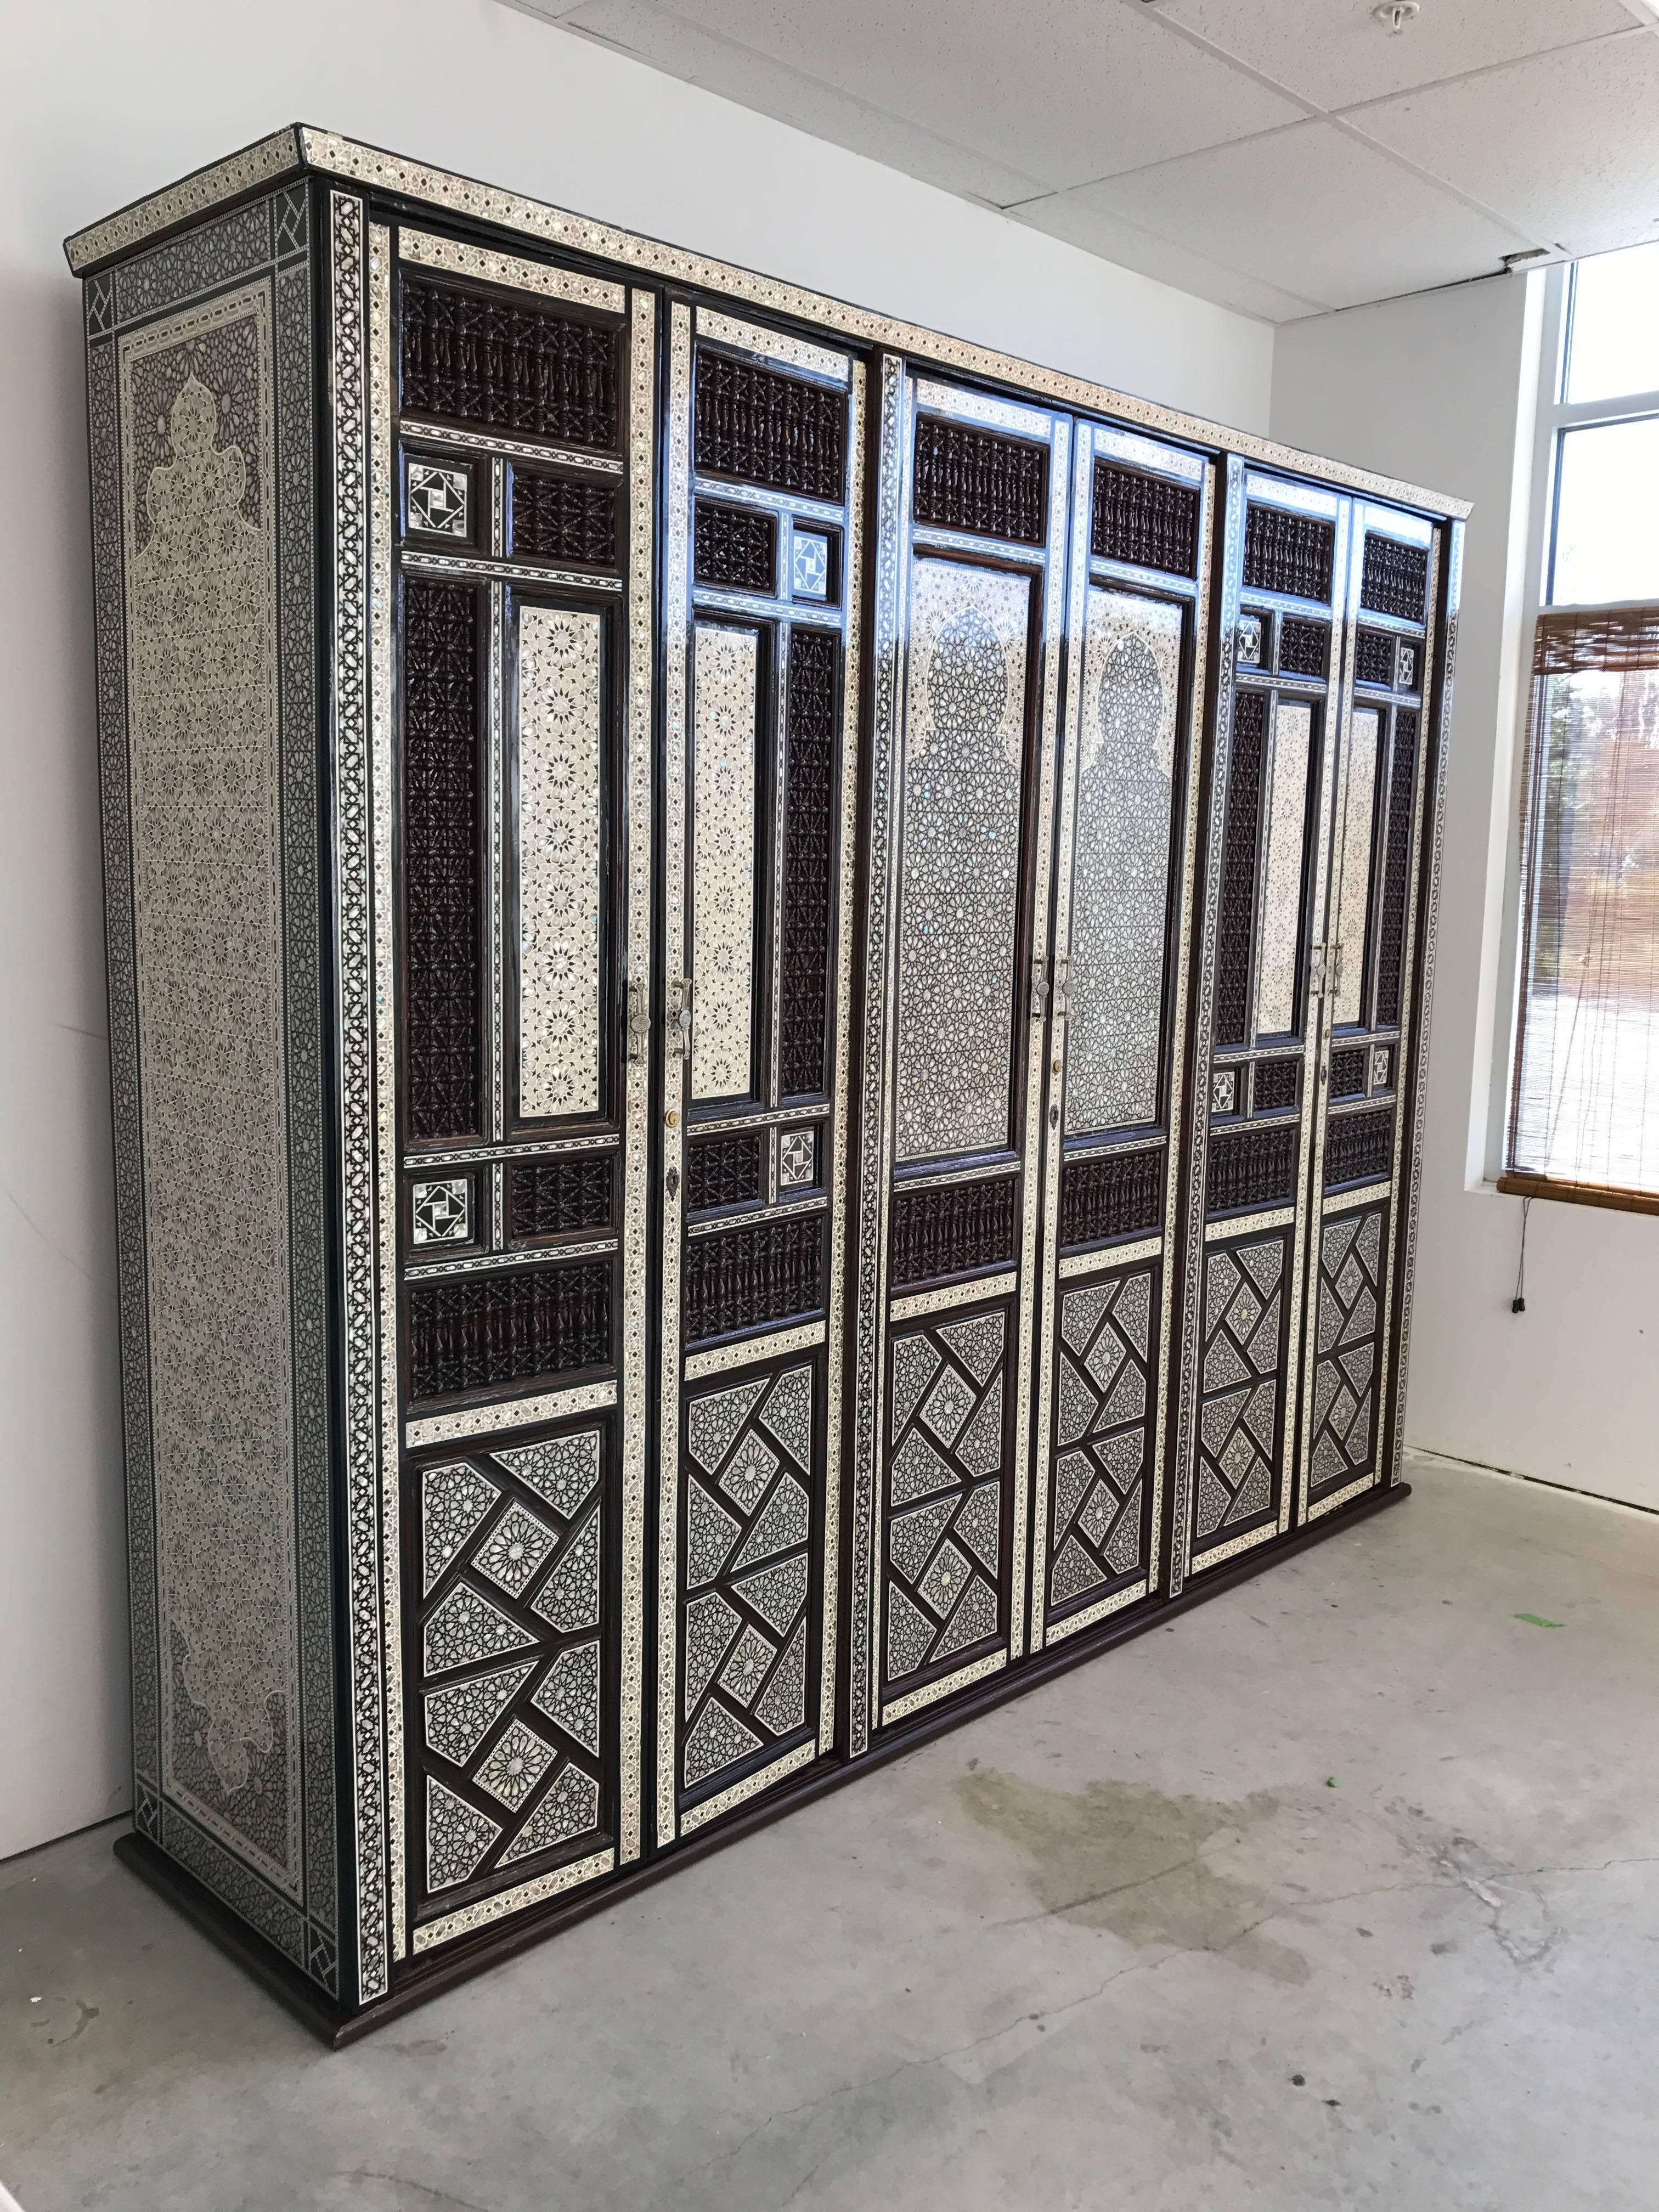 Offered is an absolutely stunning Middle Eastern armoire. The substantial piece is heavily decorated in a geometric and ornate pattern with mother-of-pearl and bone inlay, covered in a thick lacquer. Each set of doors open to shelving. Two outer